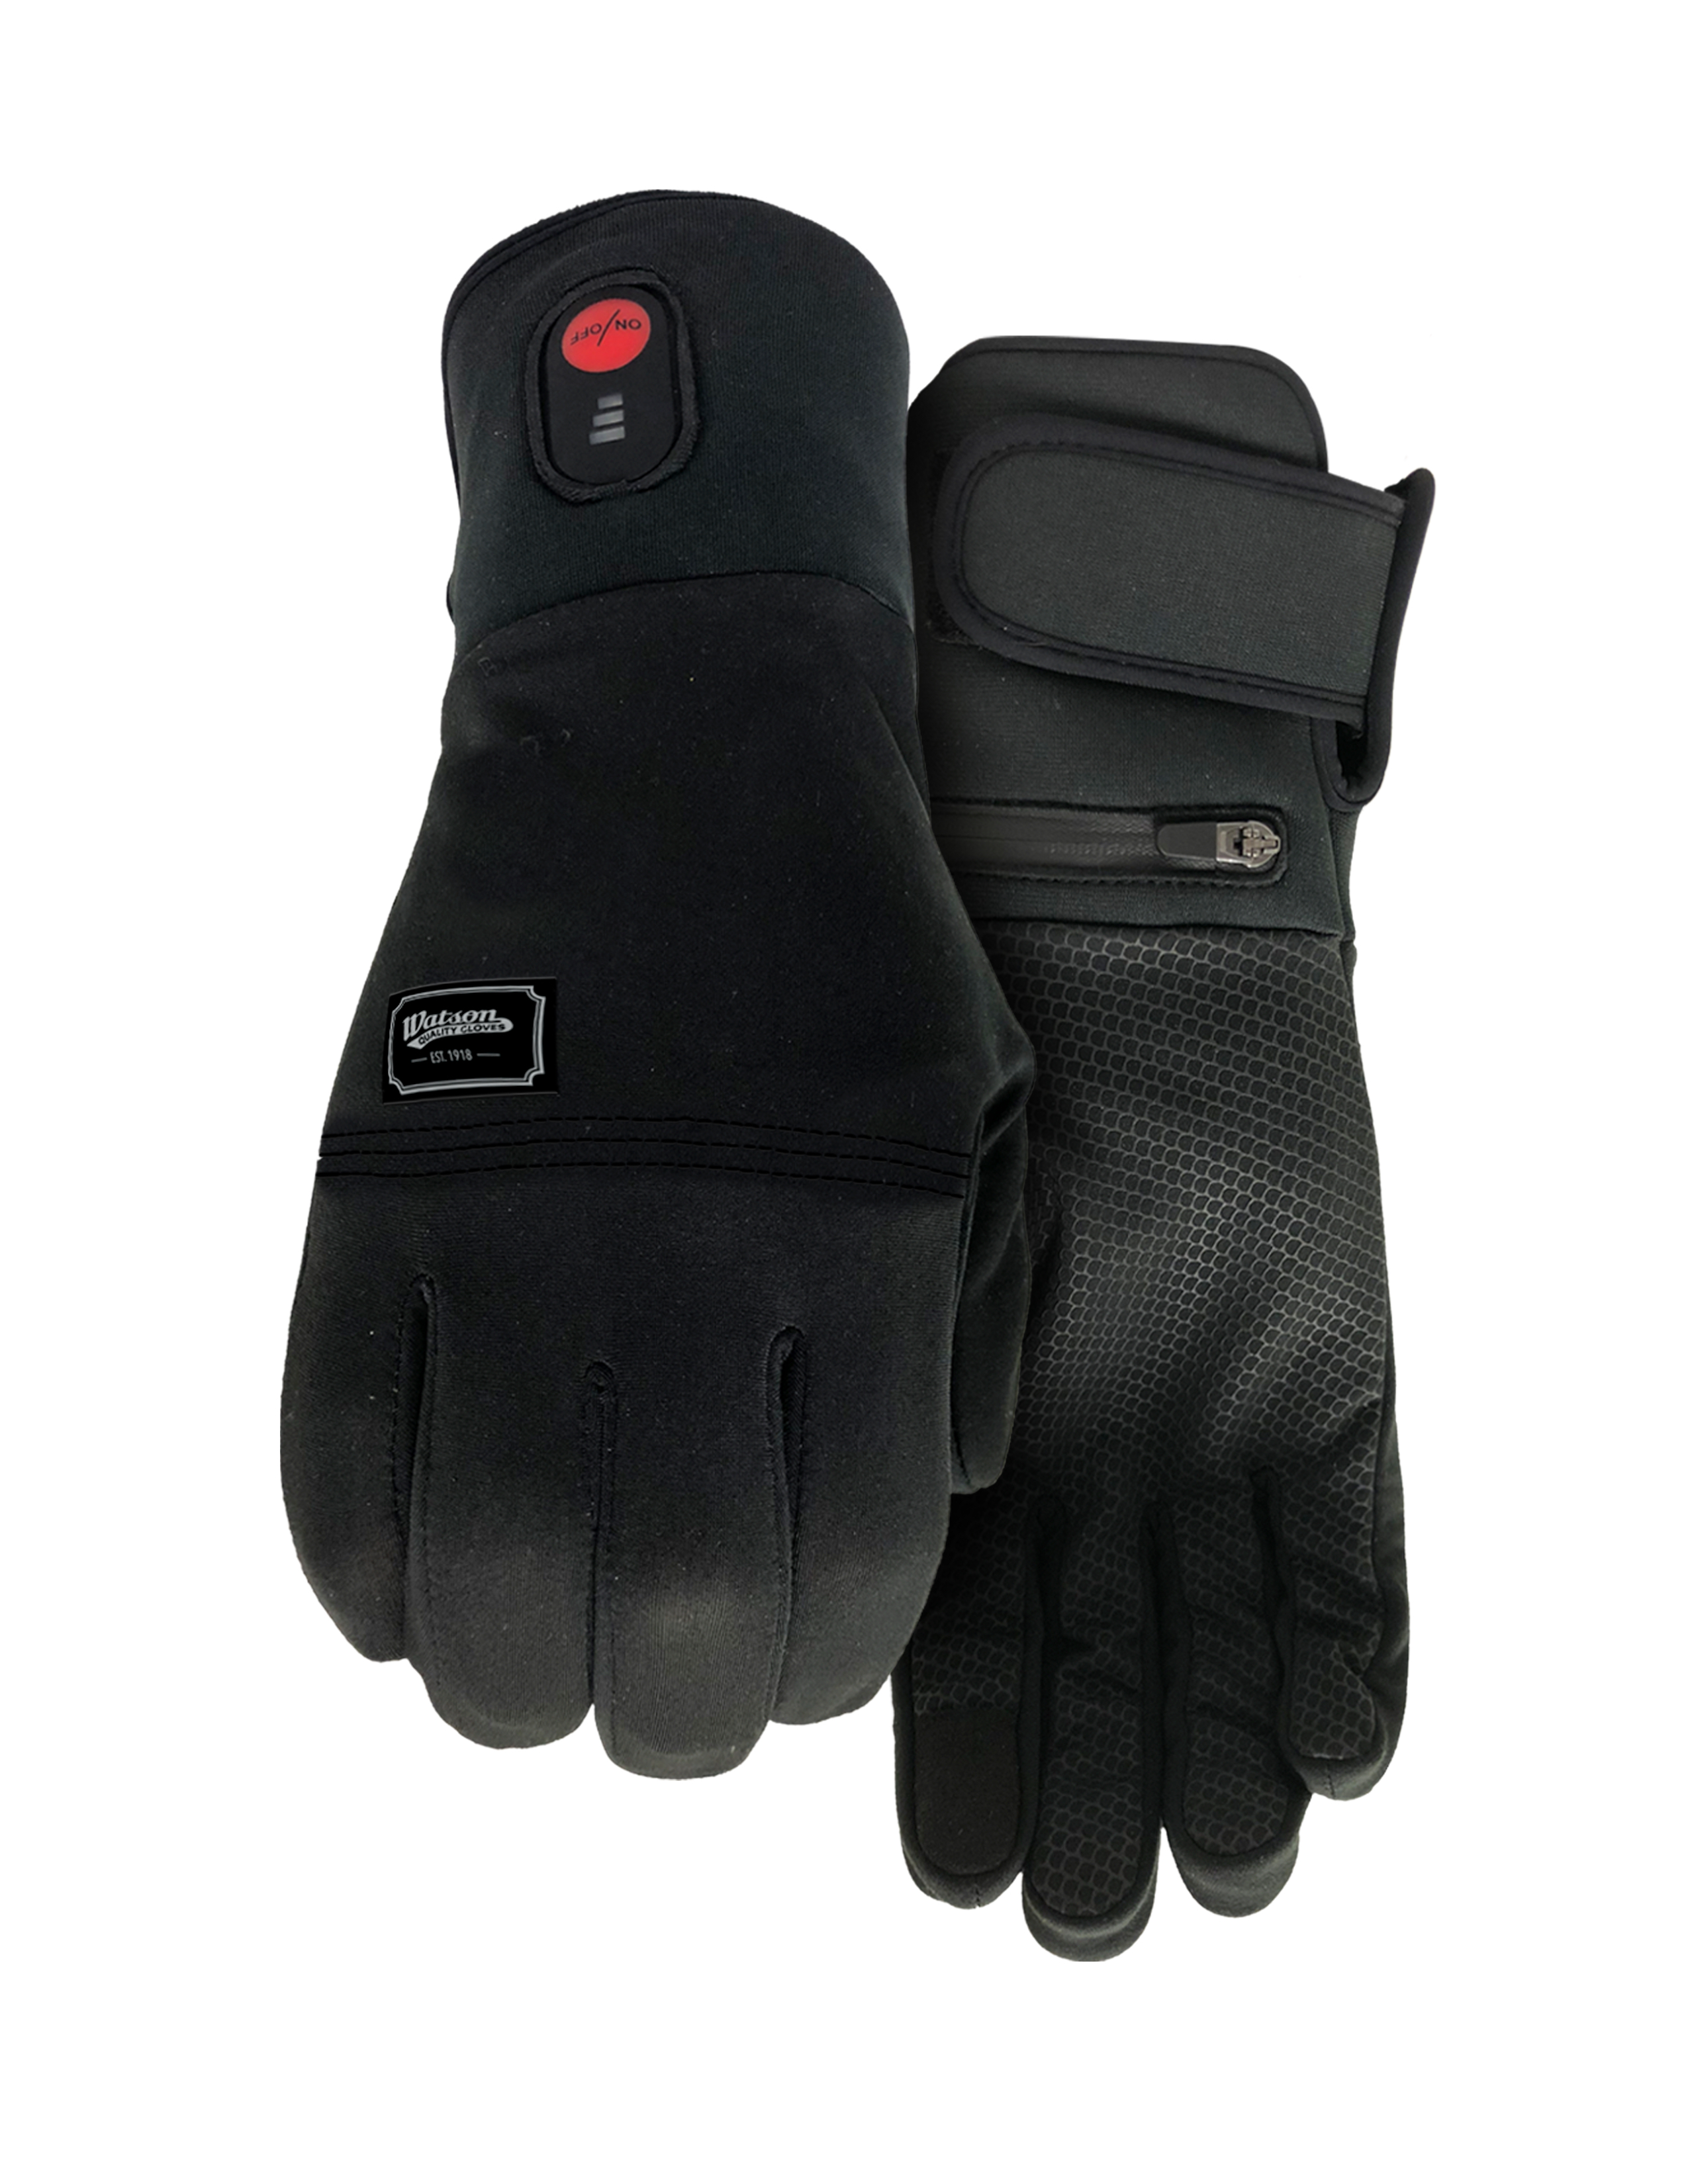 Black Ice Battery Heated Glove Liners